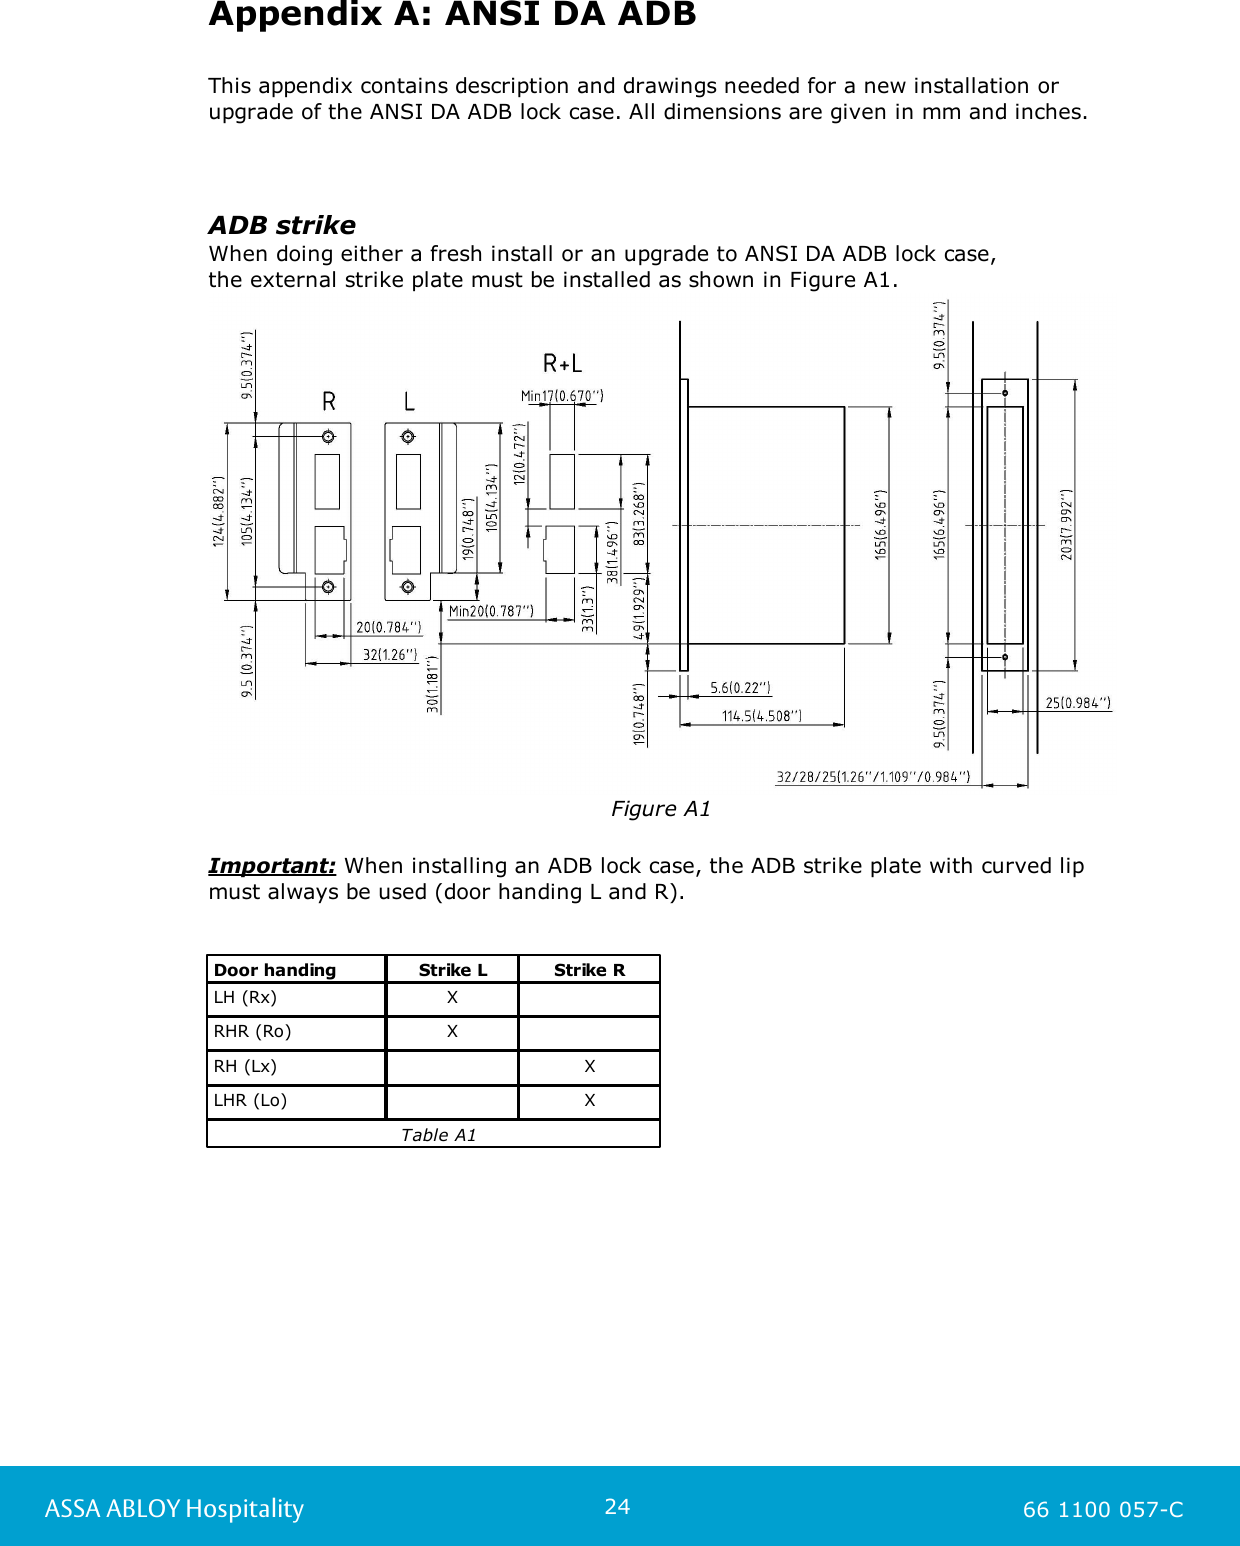 24ASSA ABLOY Hospitality 66 1100 057-CAppendix A: ANSI DA ADBThis appendix contains description and drawings needed for a new installation orupgrade of the ANSI DA ADB lock case. All dimensions are given in mm and inches.ADB strikeWhen doing either a fresh install or an upgrade to ANSI DA ADB lock case, the external strike plate must be installed as shown in Figure A1.Figure A1Important: When installing an ADB lock case, the ADB strike plate with curved lipmust always be used (door handing L and R).Door handingStrike LStrike RLH (Rx)XRHR (Ro)XRH (Lx)XLHR (Lo)X                              Table A1